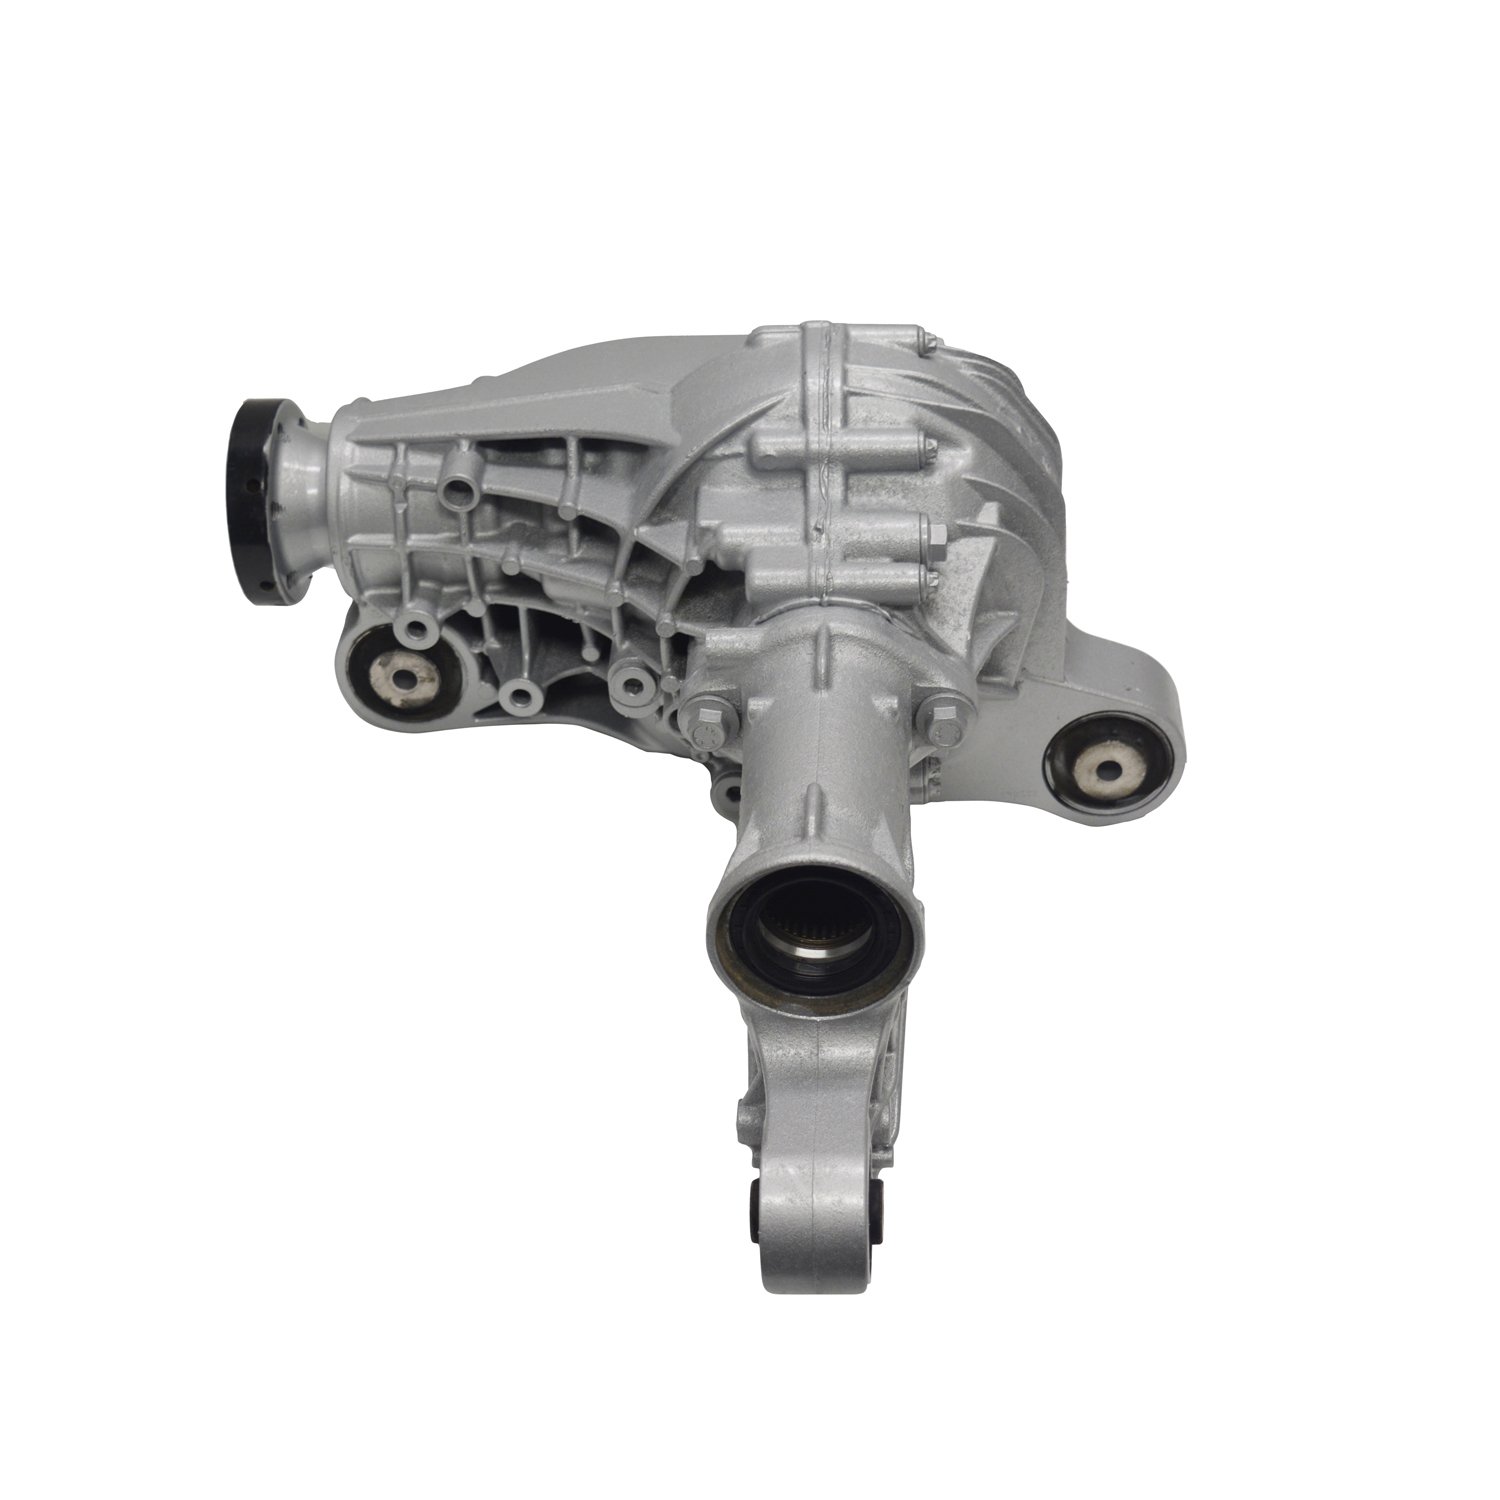 Remanufactured Front diff for 2007-2011 Mercedes ML Class